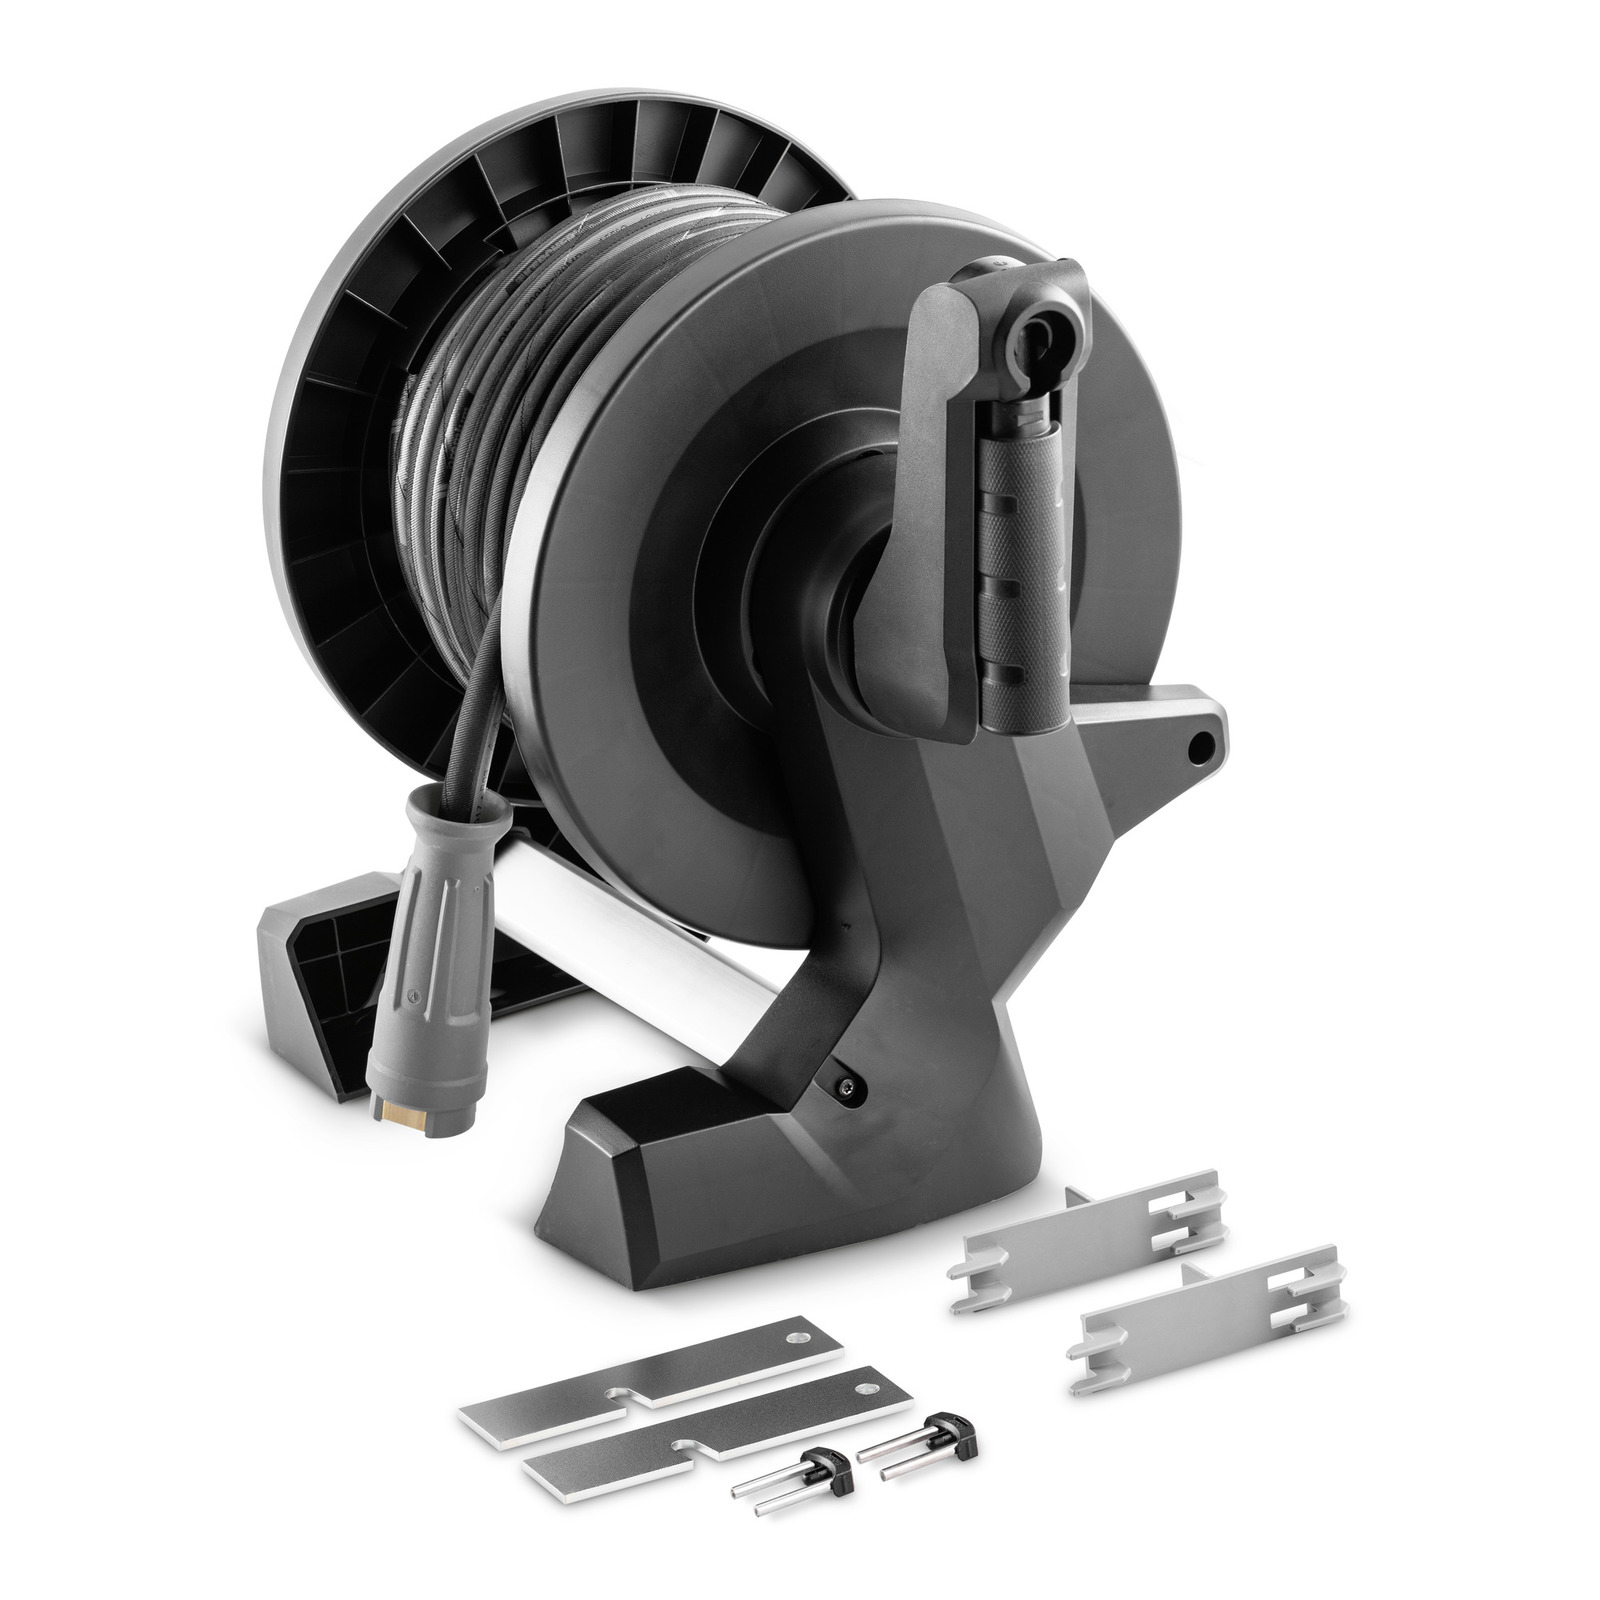 Hose reel attachment kit for HD middle class, 15 m